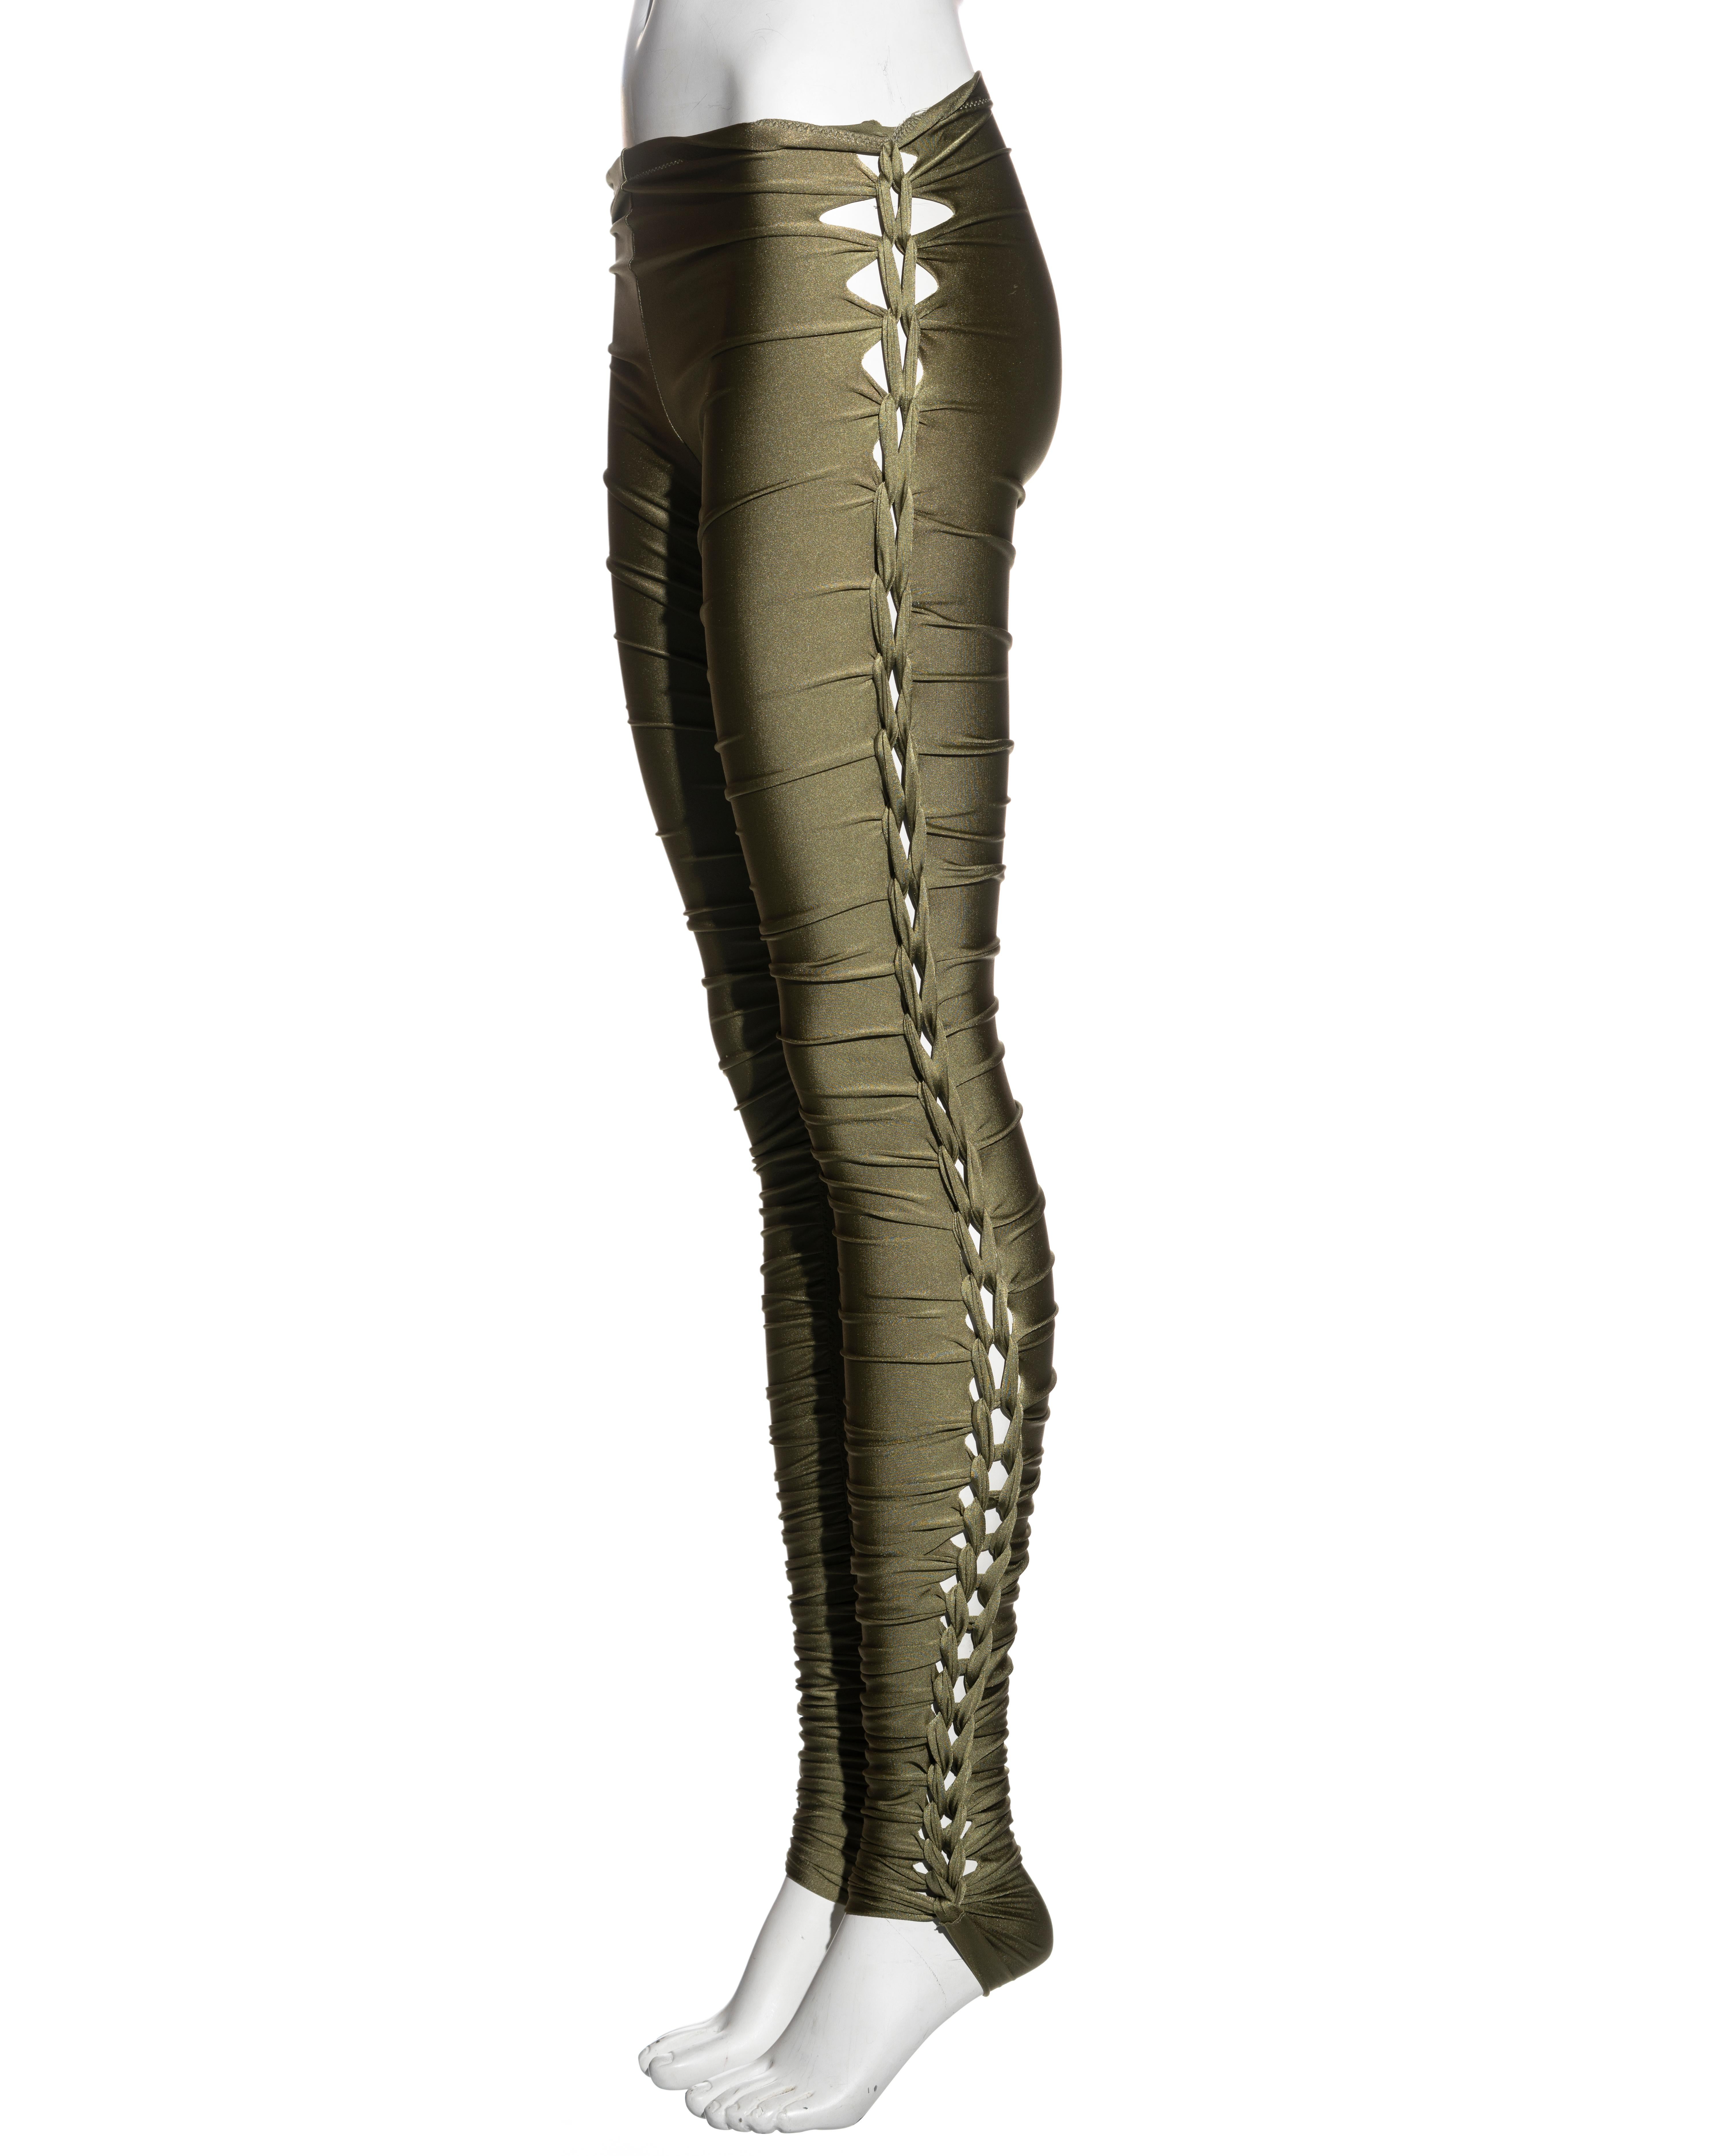 Jean Paul Gaultier green nylon jersey ruched leggings, ss 2011 For Sale 5